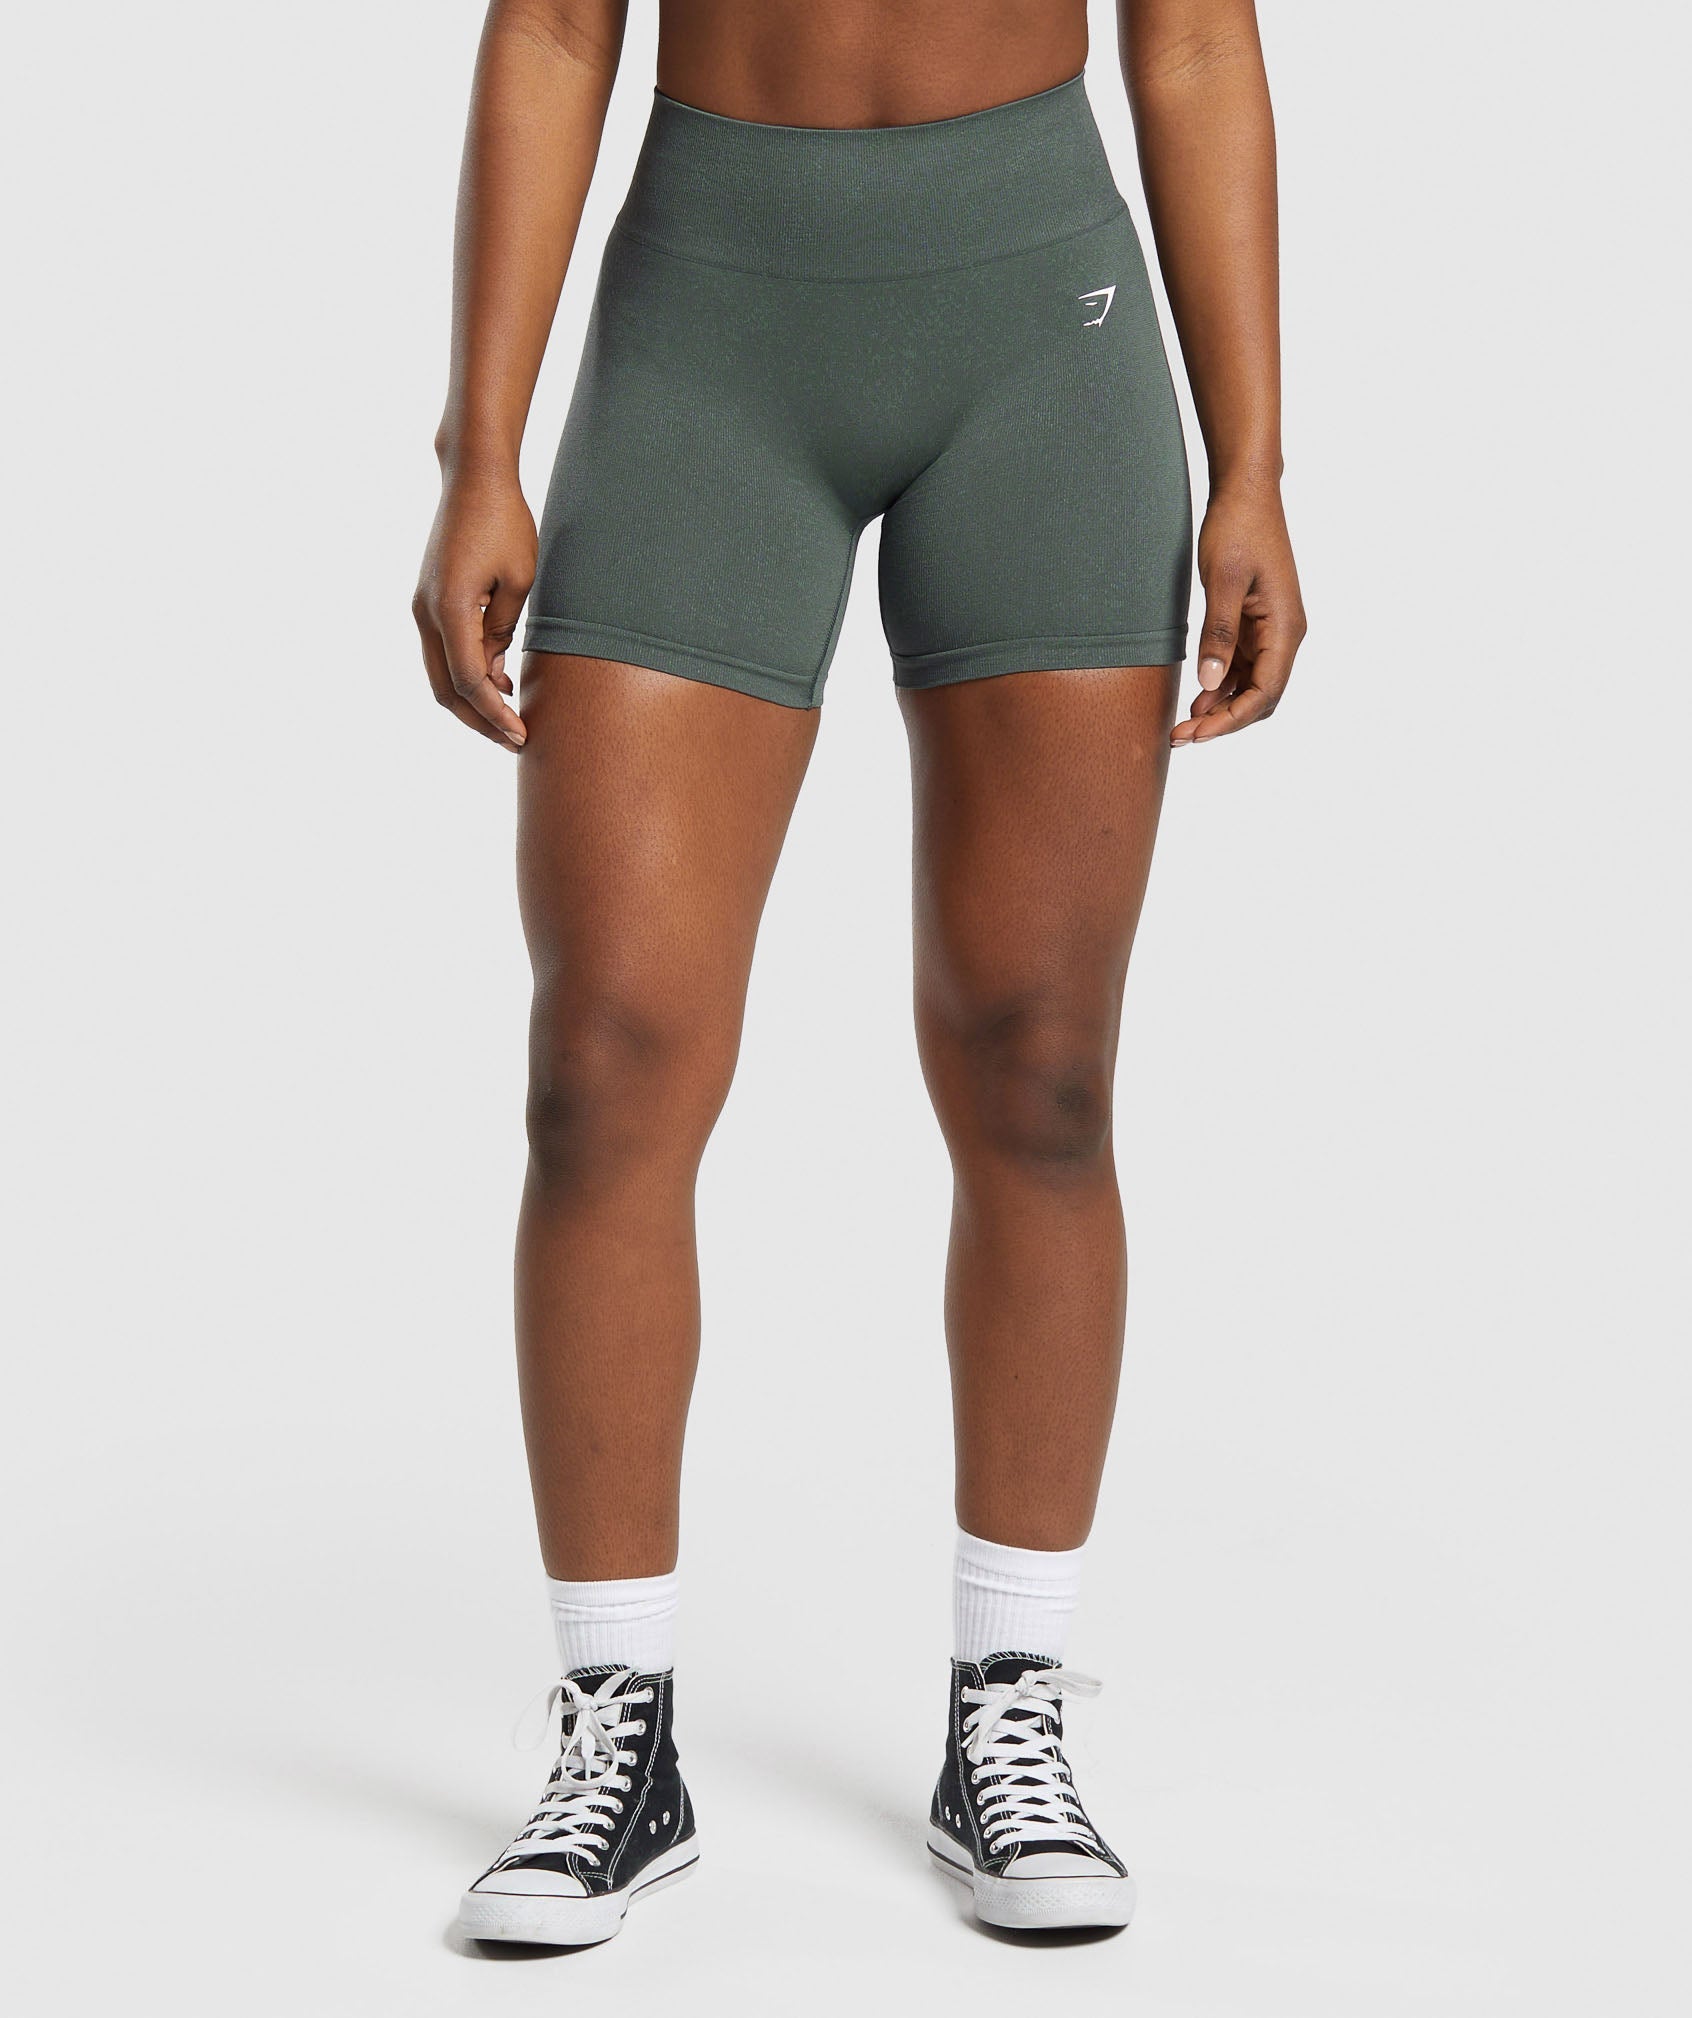 Adapt Fleck Seamless Shorts in Slate Teal/Cargo Teal - view 1